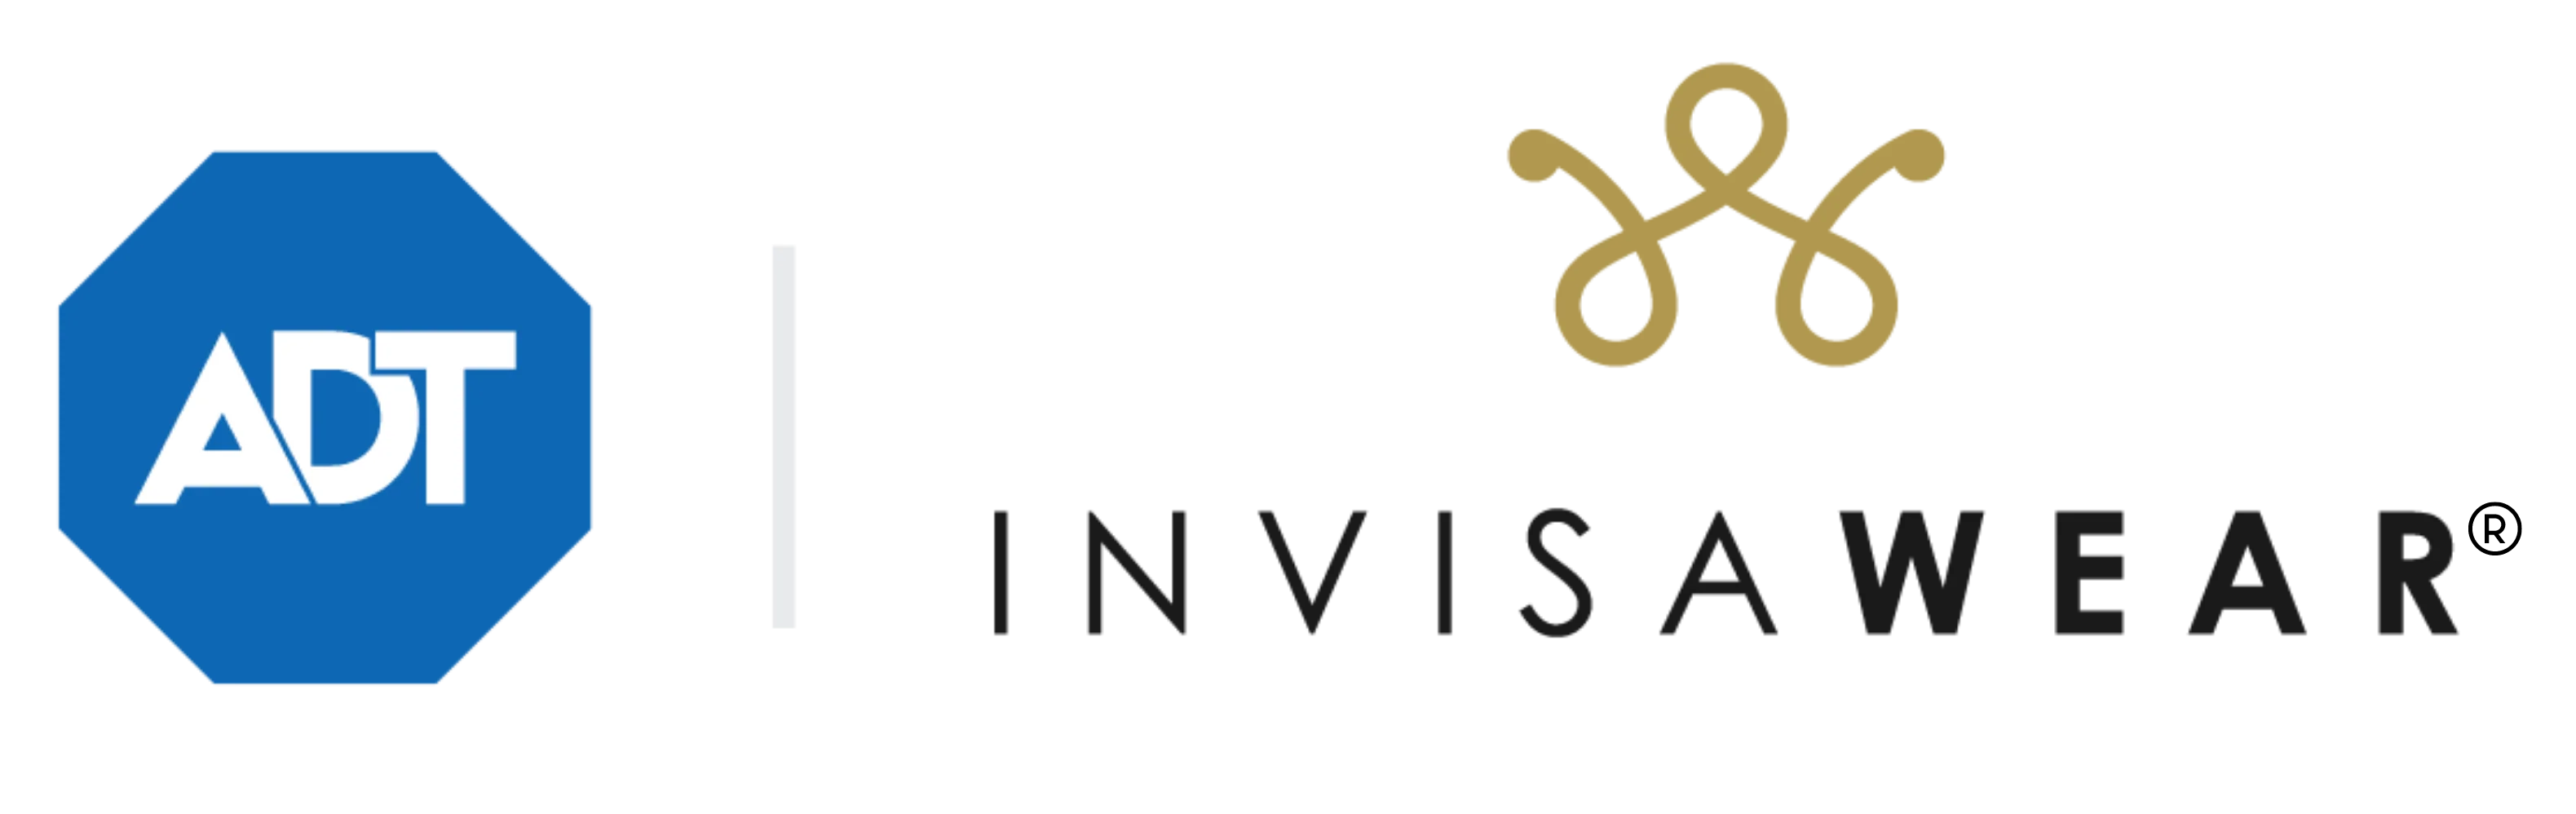 invisaWear coupon codes, promo codes and deals